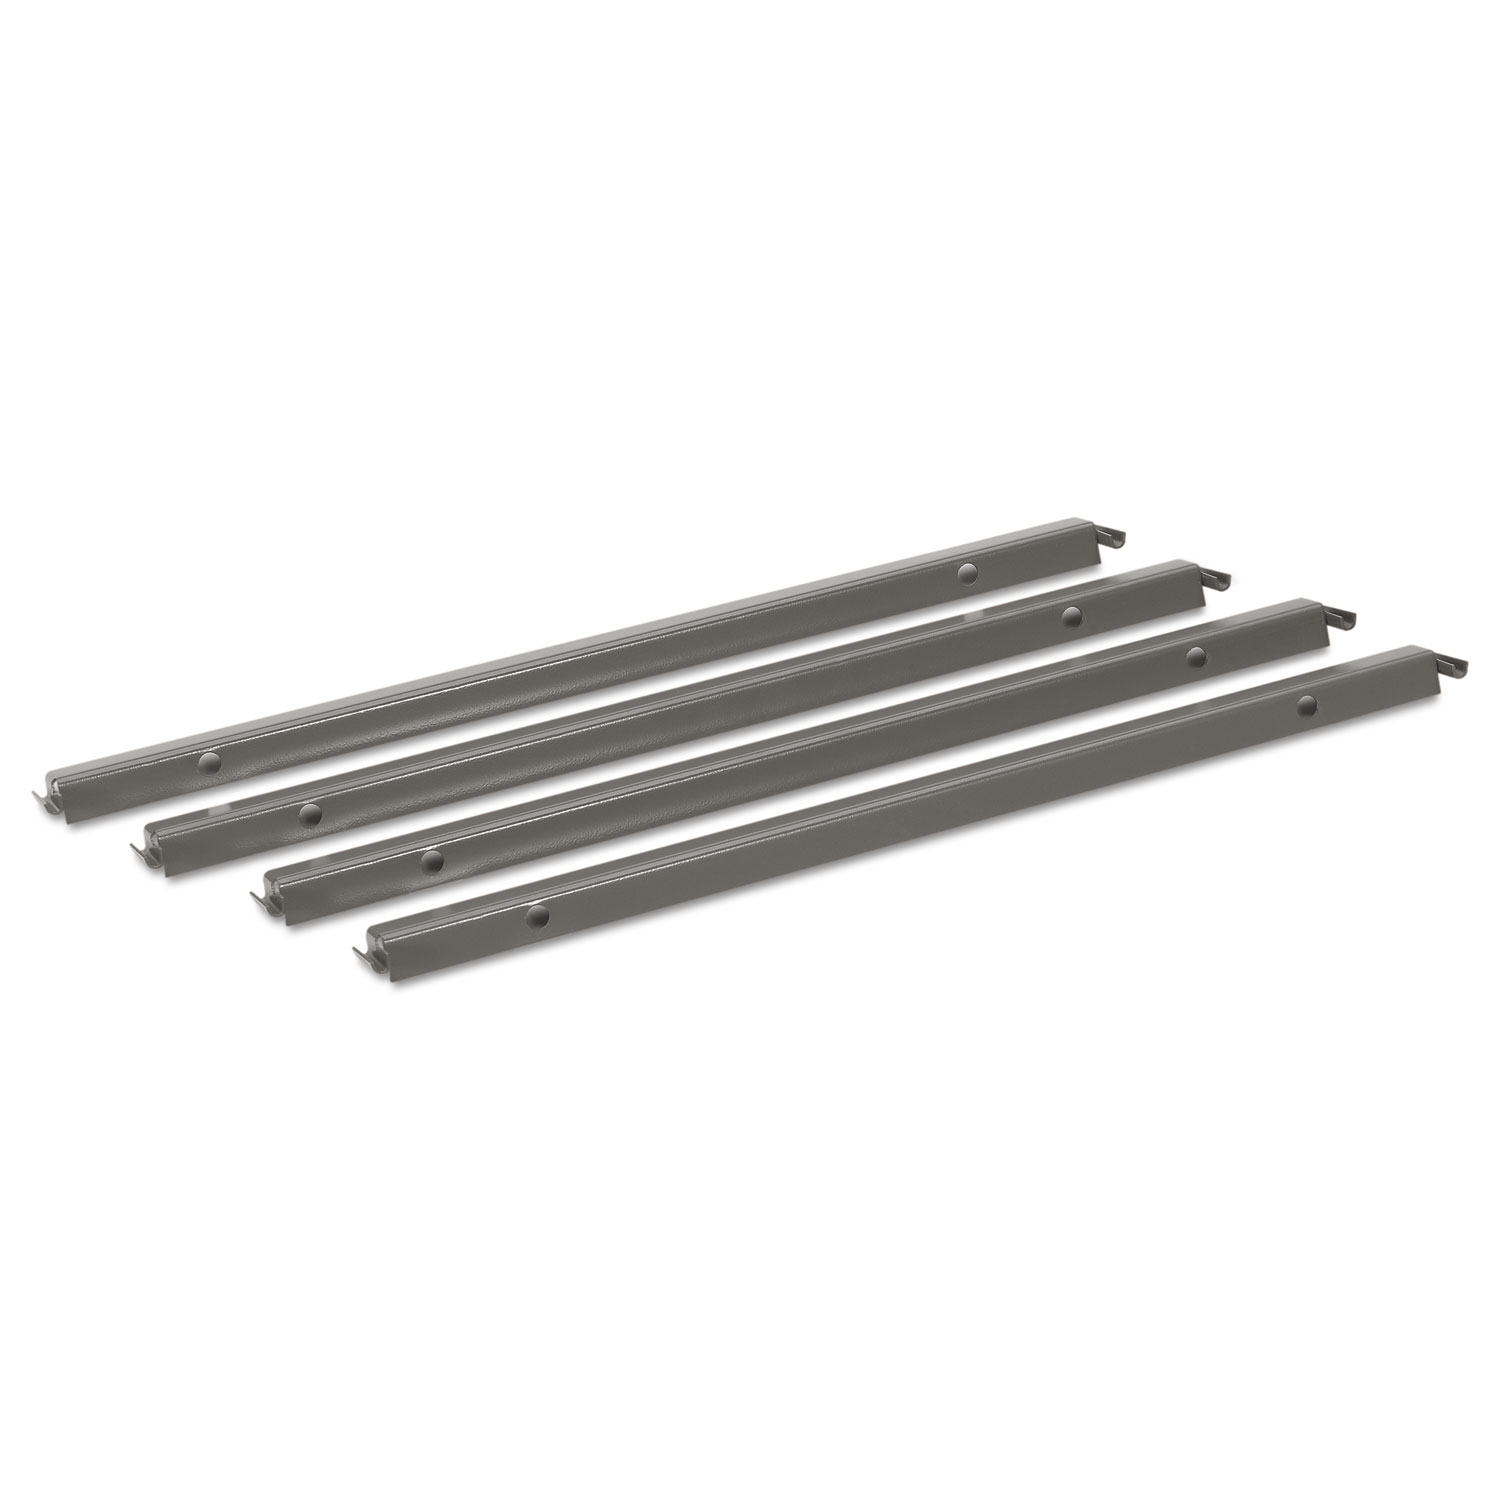  HON H919491 Single Cross Rails for 30 and 36 Lateral Files, Gray (HON919491) 